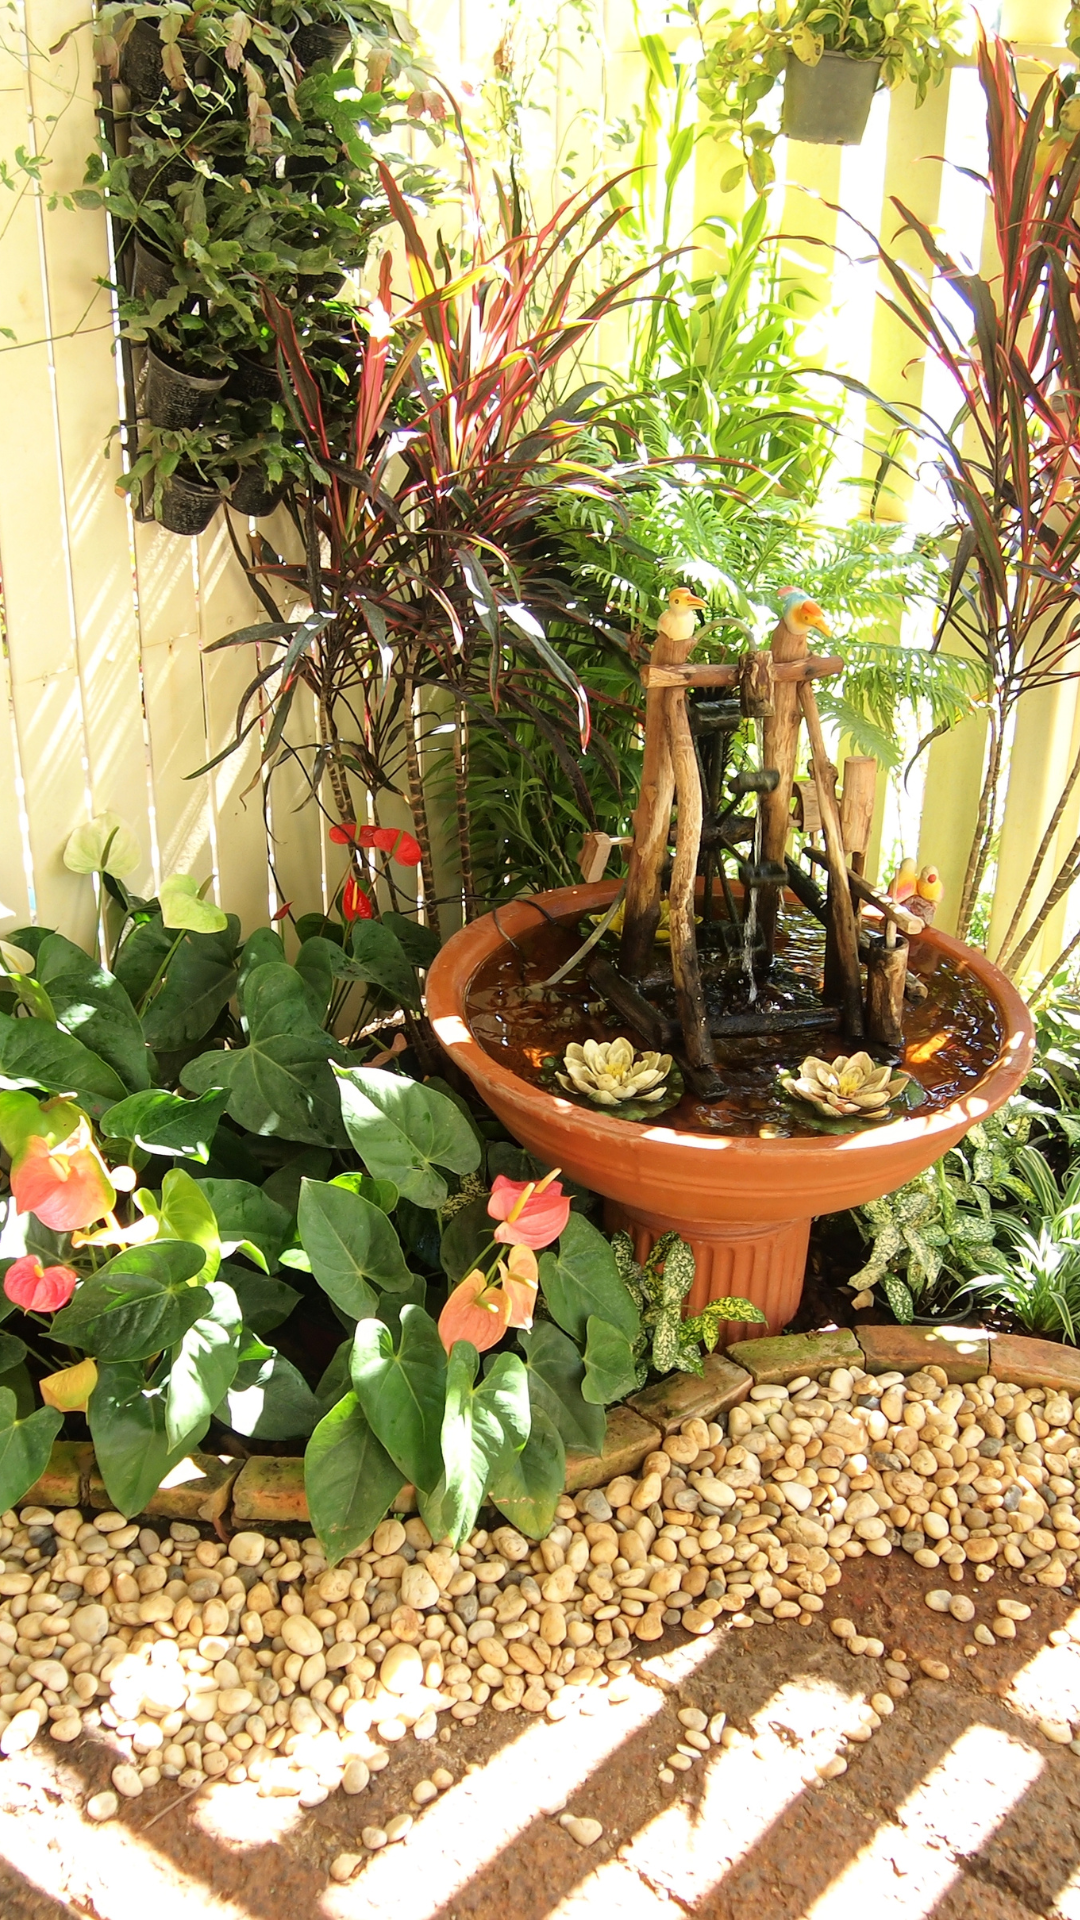 9 Decor ideas that make a beautiful home garden | Times of India